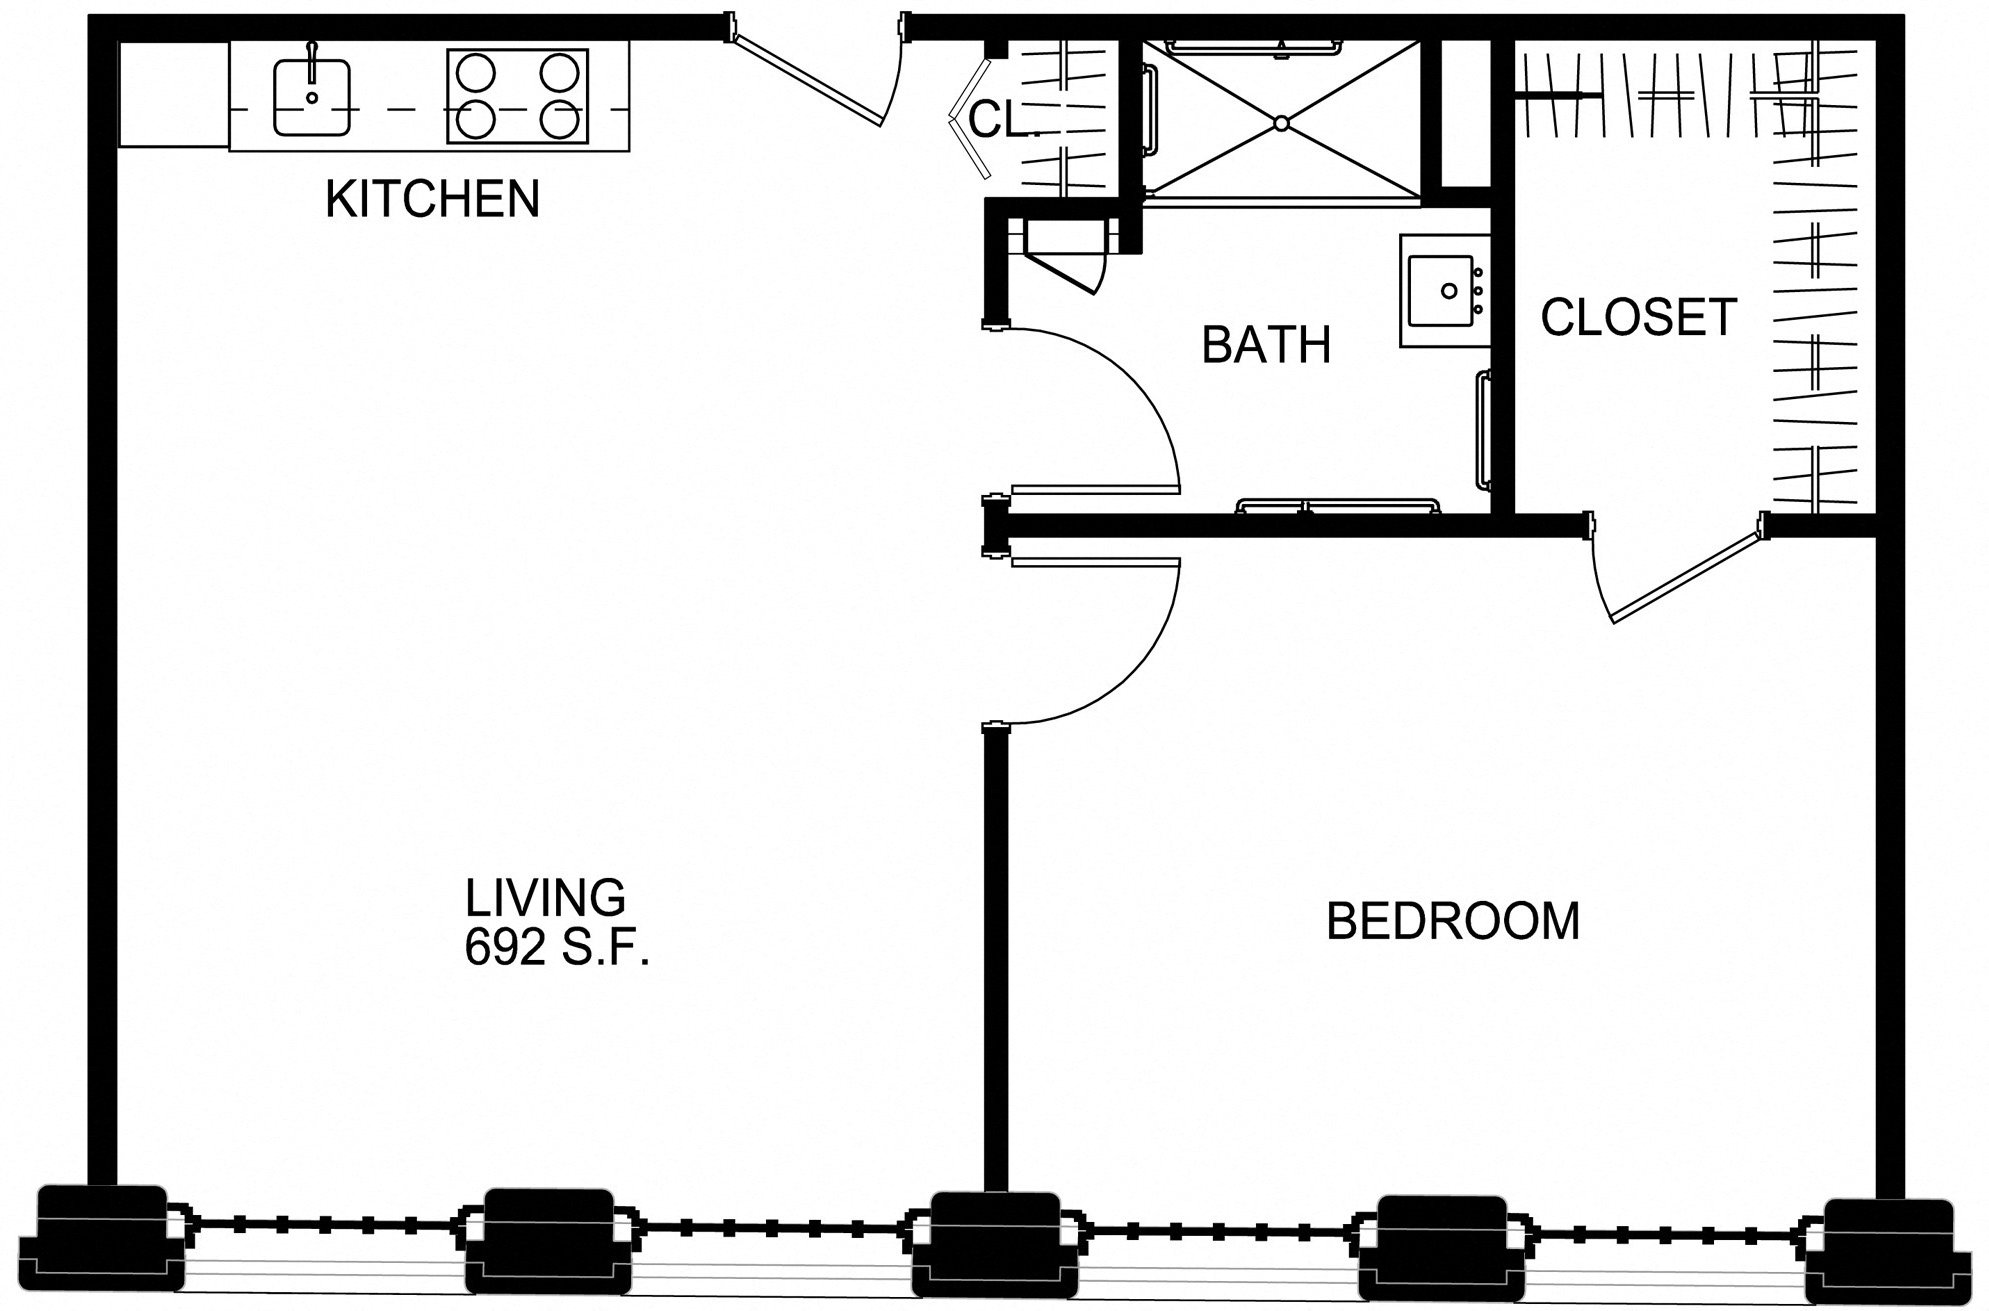 Floorplan for Apartment #S2421, 1 bedroom unit at Halstead Providence